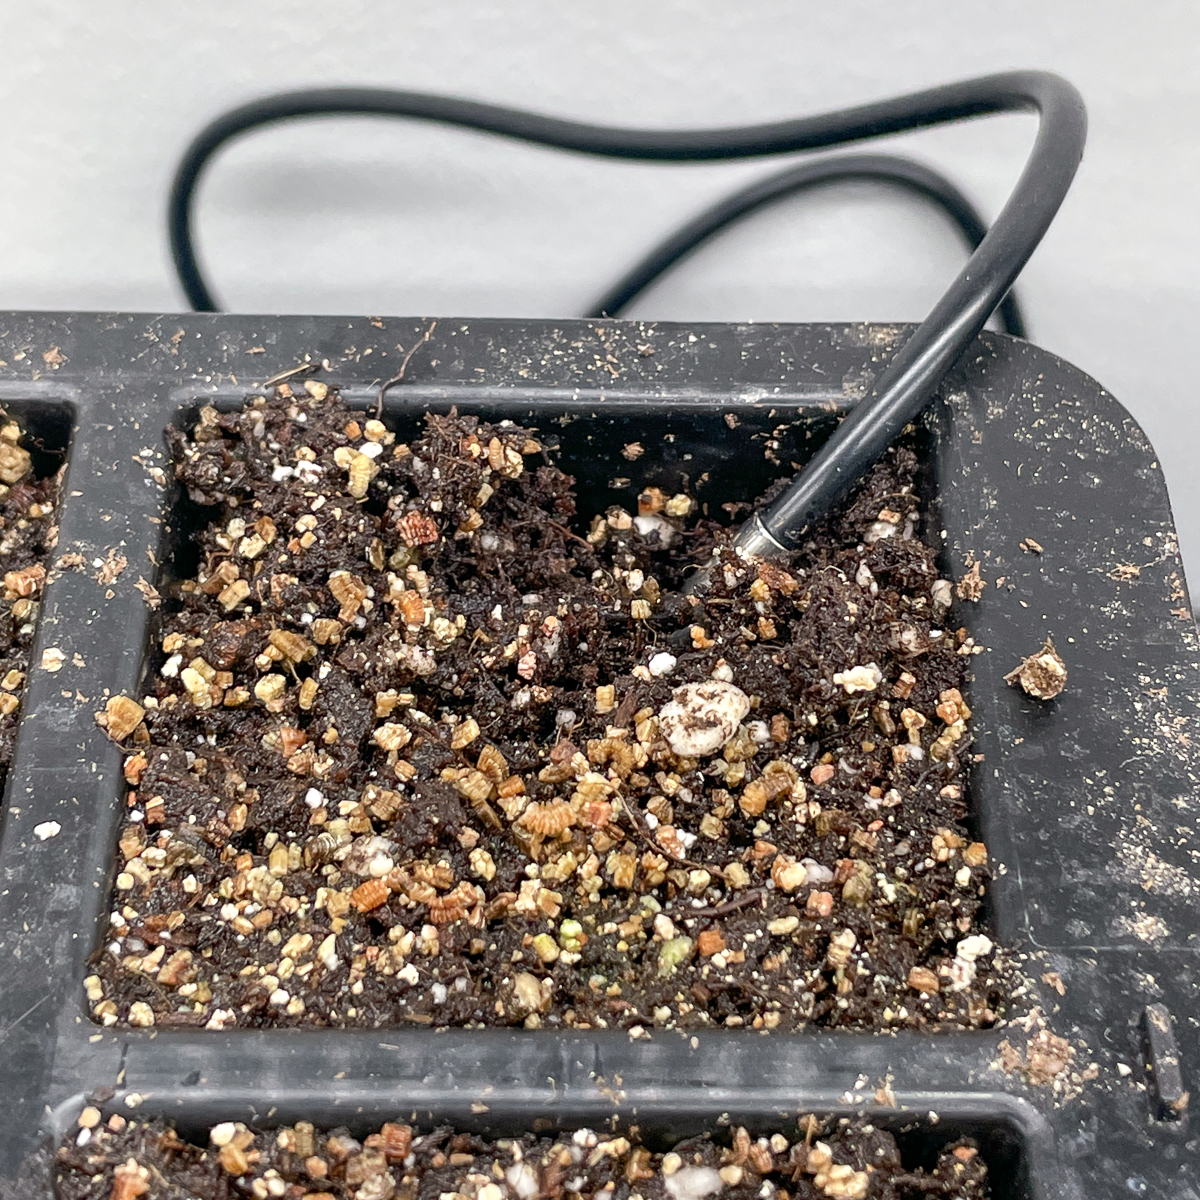 heat mat temperature probe in soil of seed tray